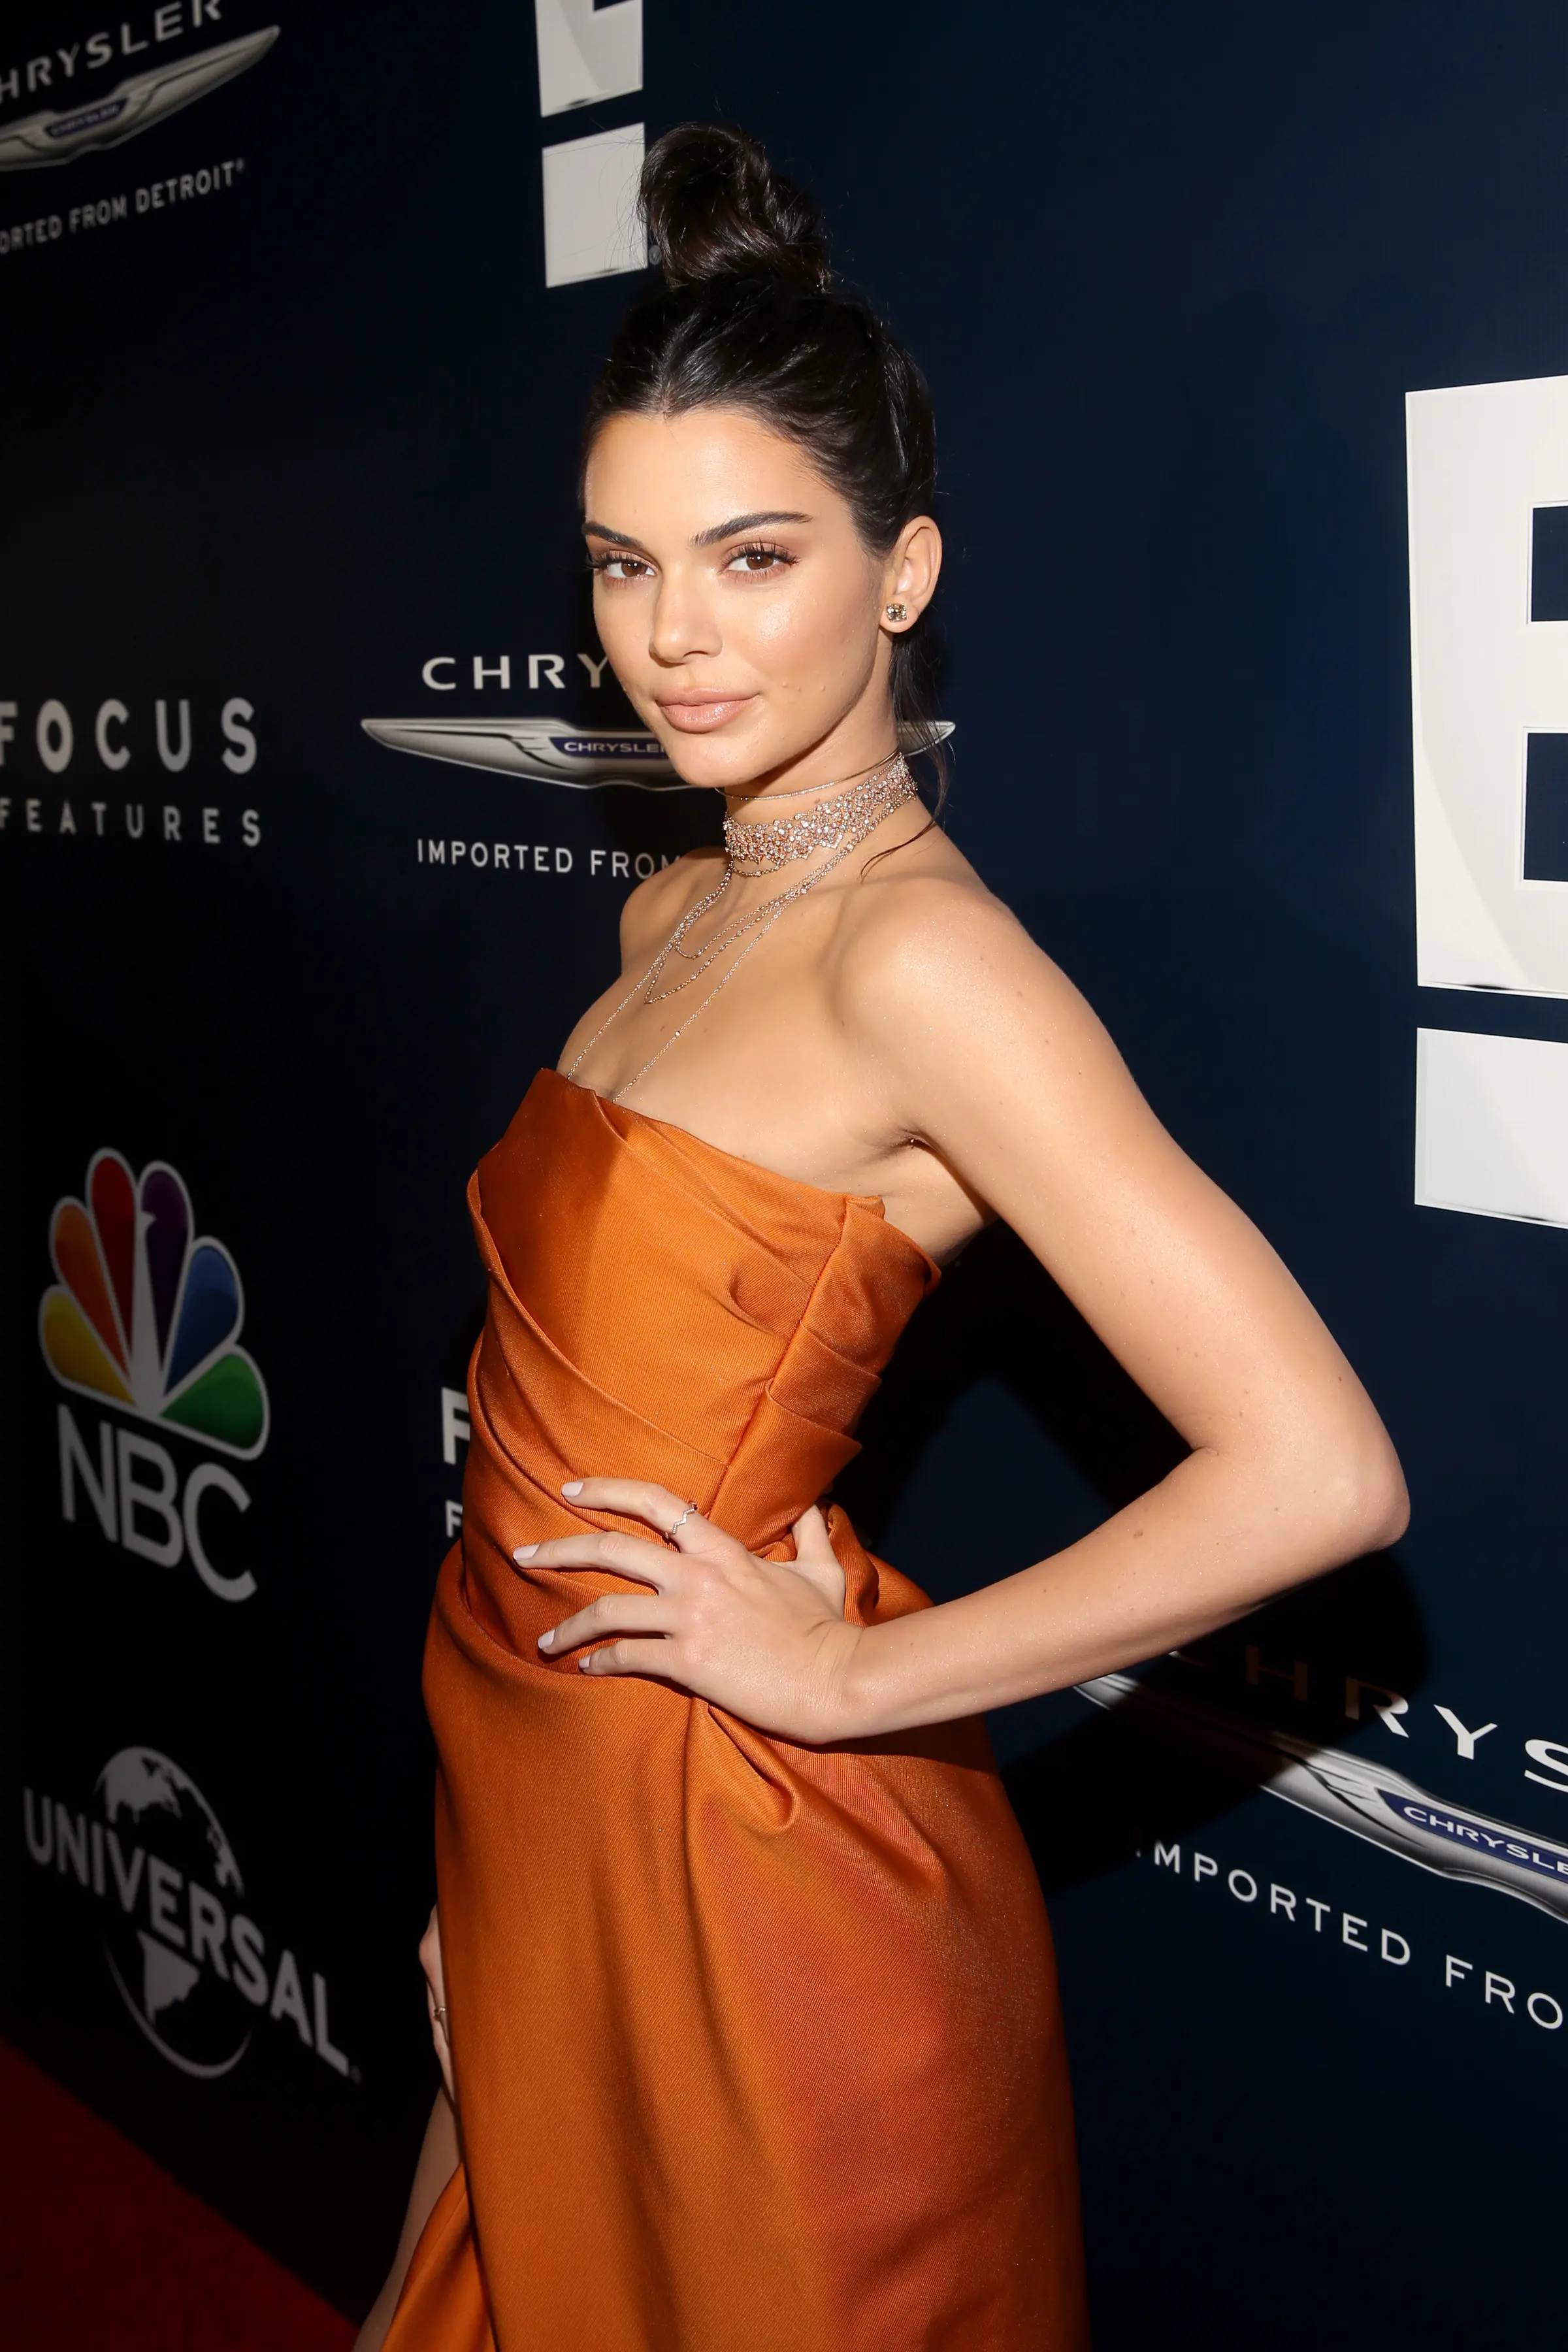 Kendall Jenner. (AFP/Jesse Grant / GETTY IMAGES NORTH AMERICA)